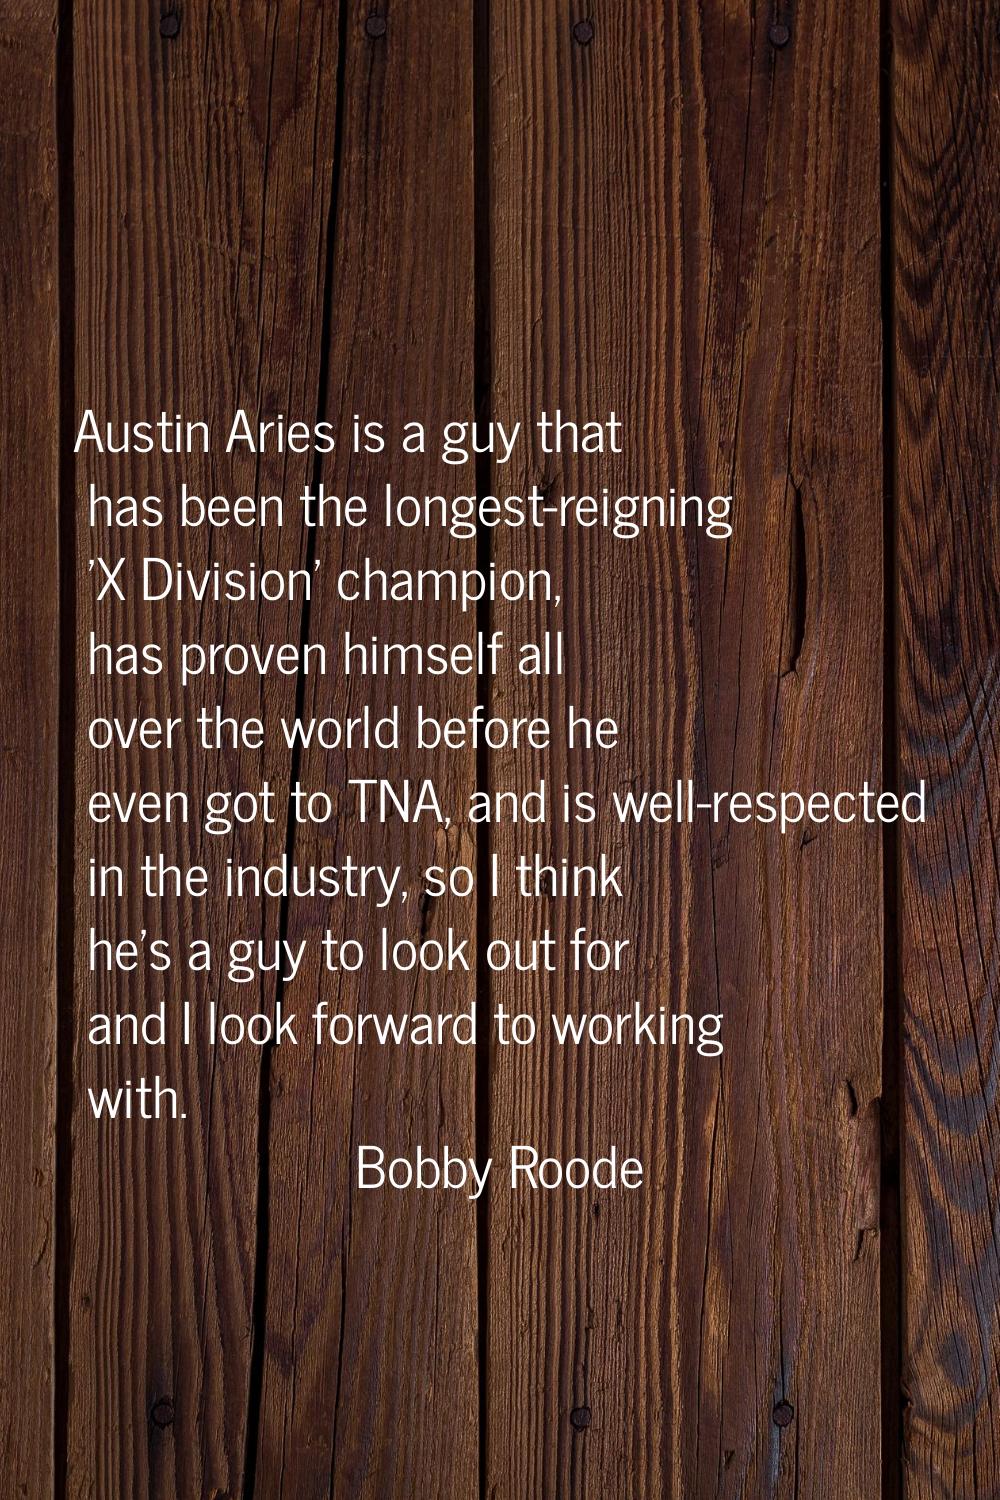 Austin Aries is a guy that has been the longest-reigning 'X Division' champion, has proven himself 